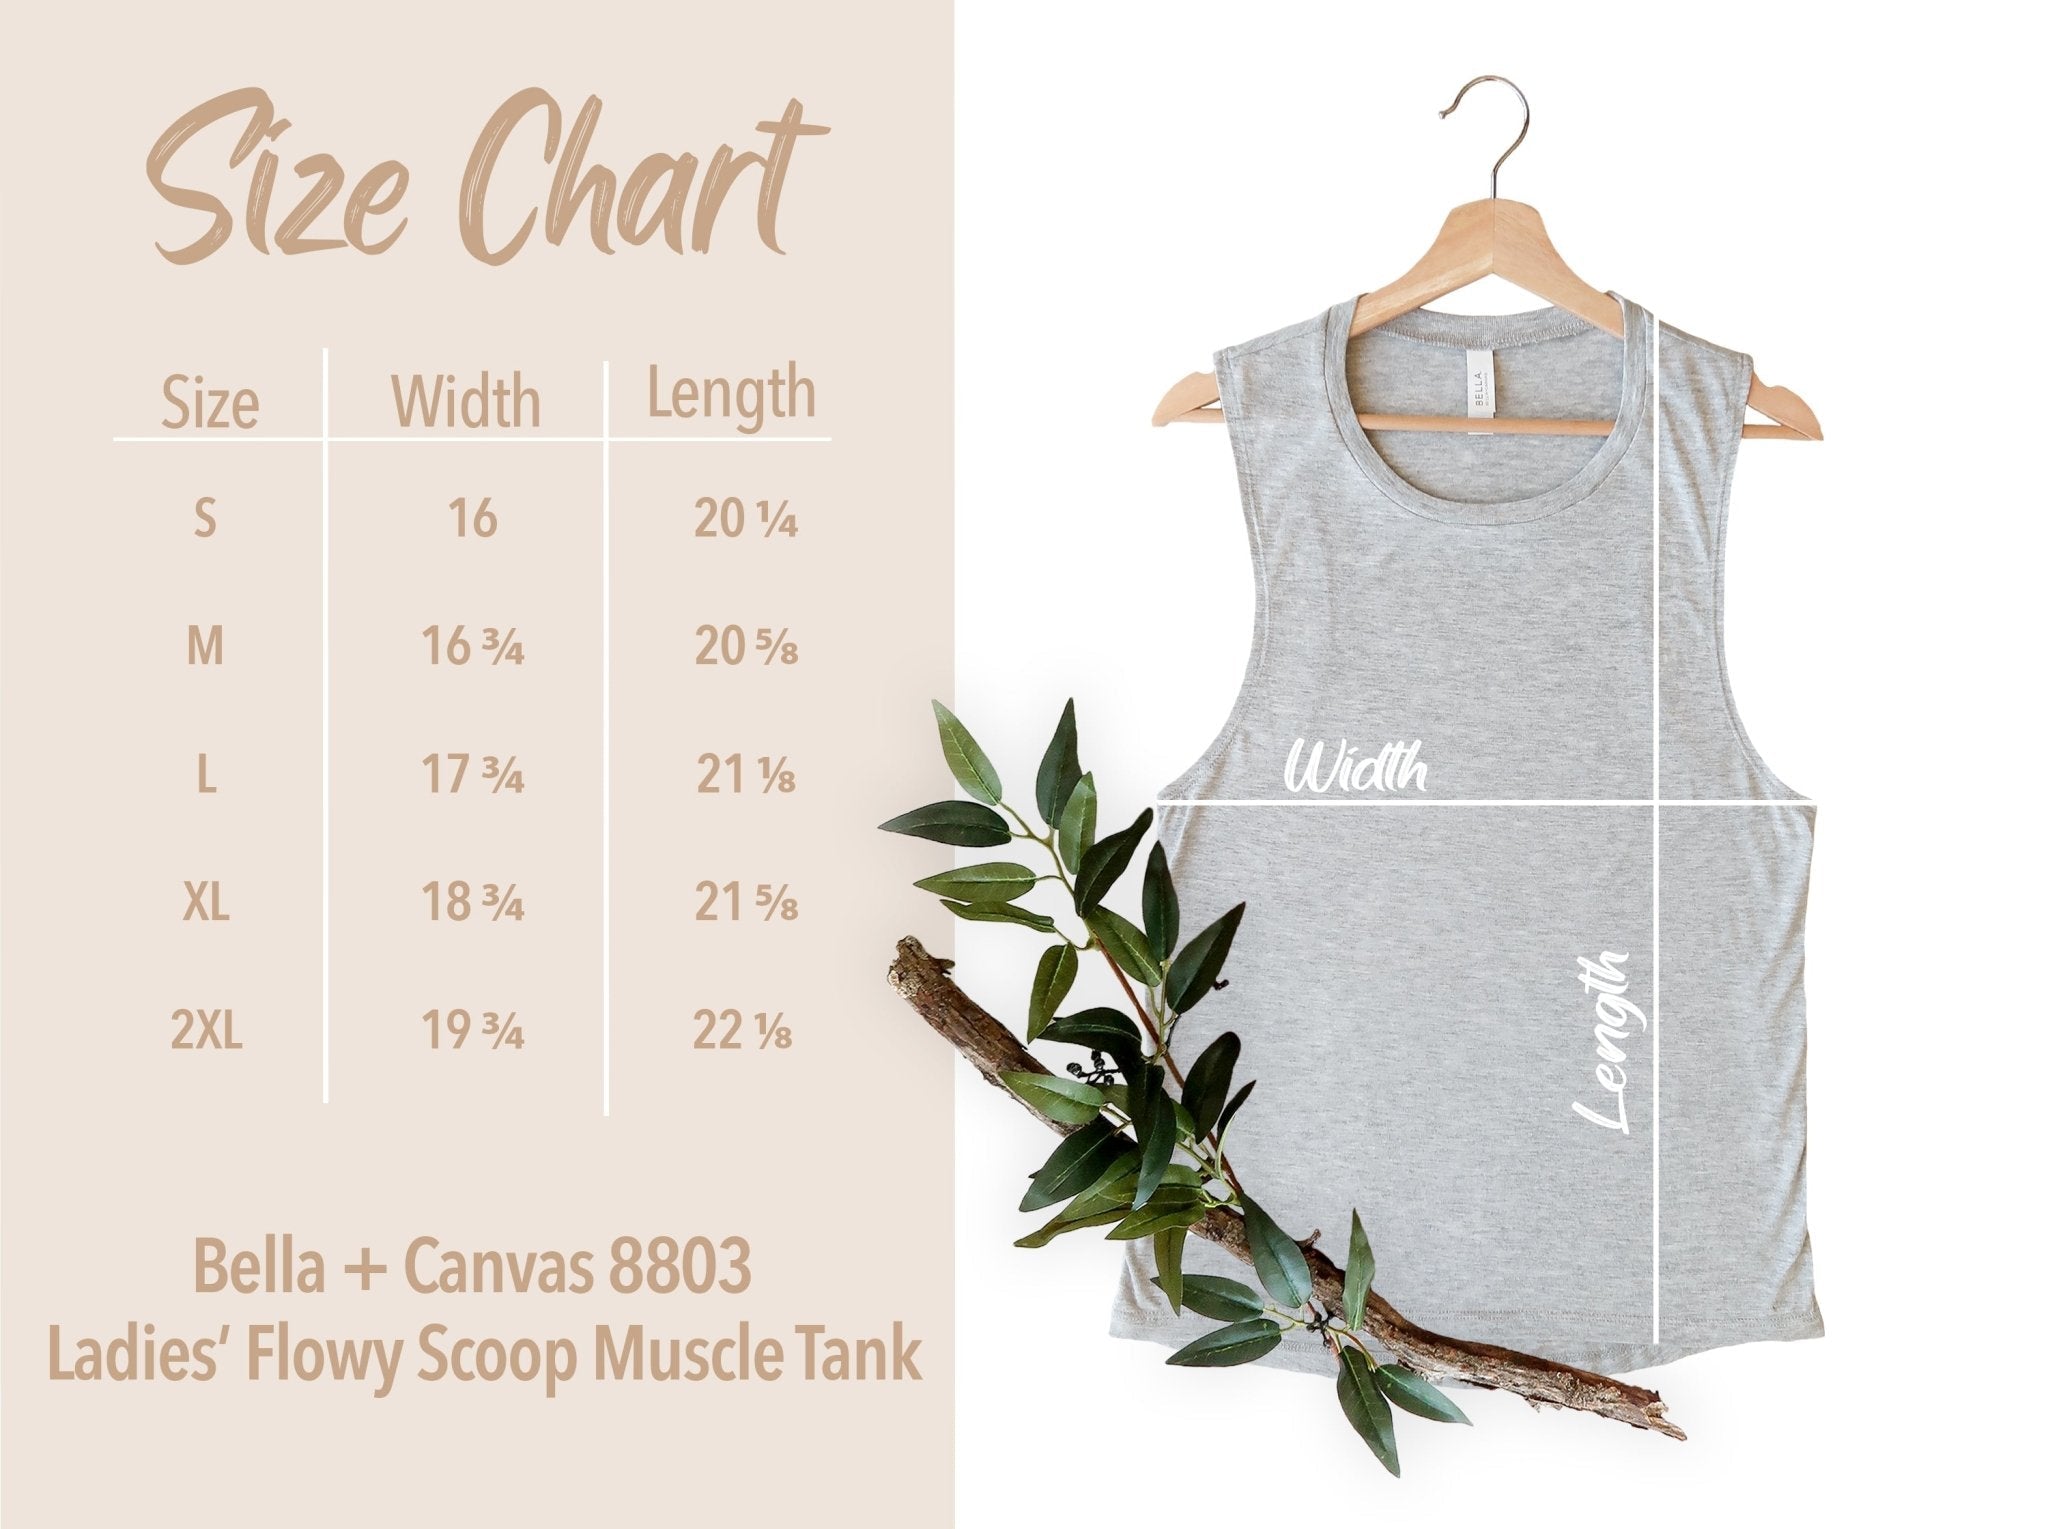 Raisin Hell Bella Canvas Muscle Tank Top - Trendznmore